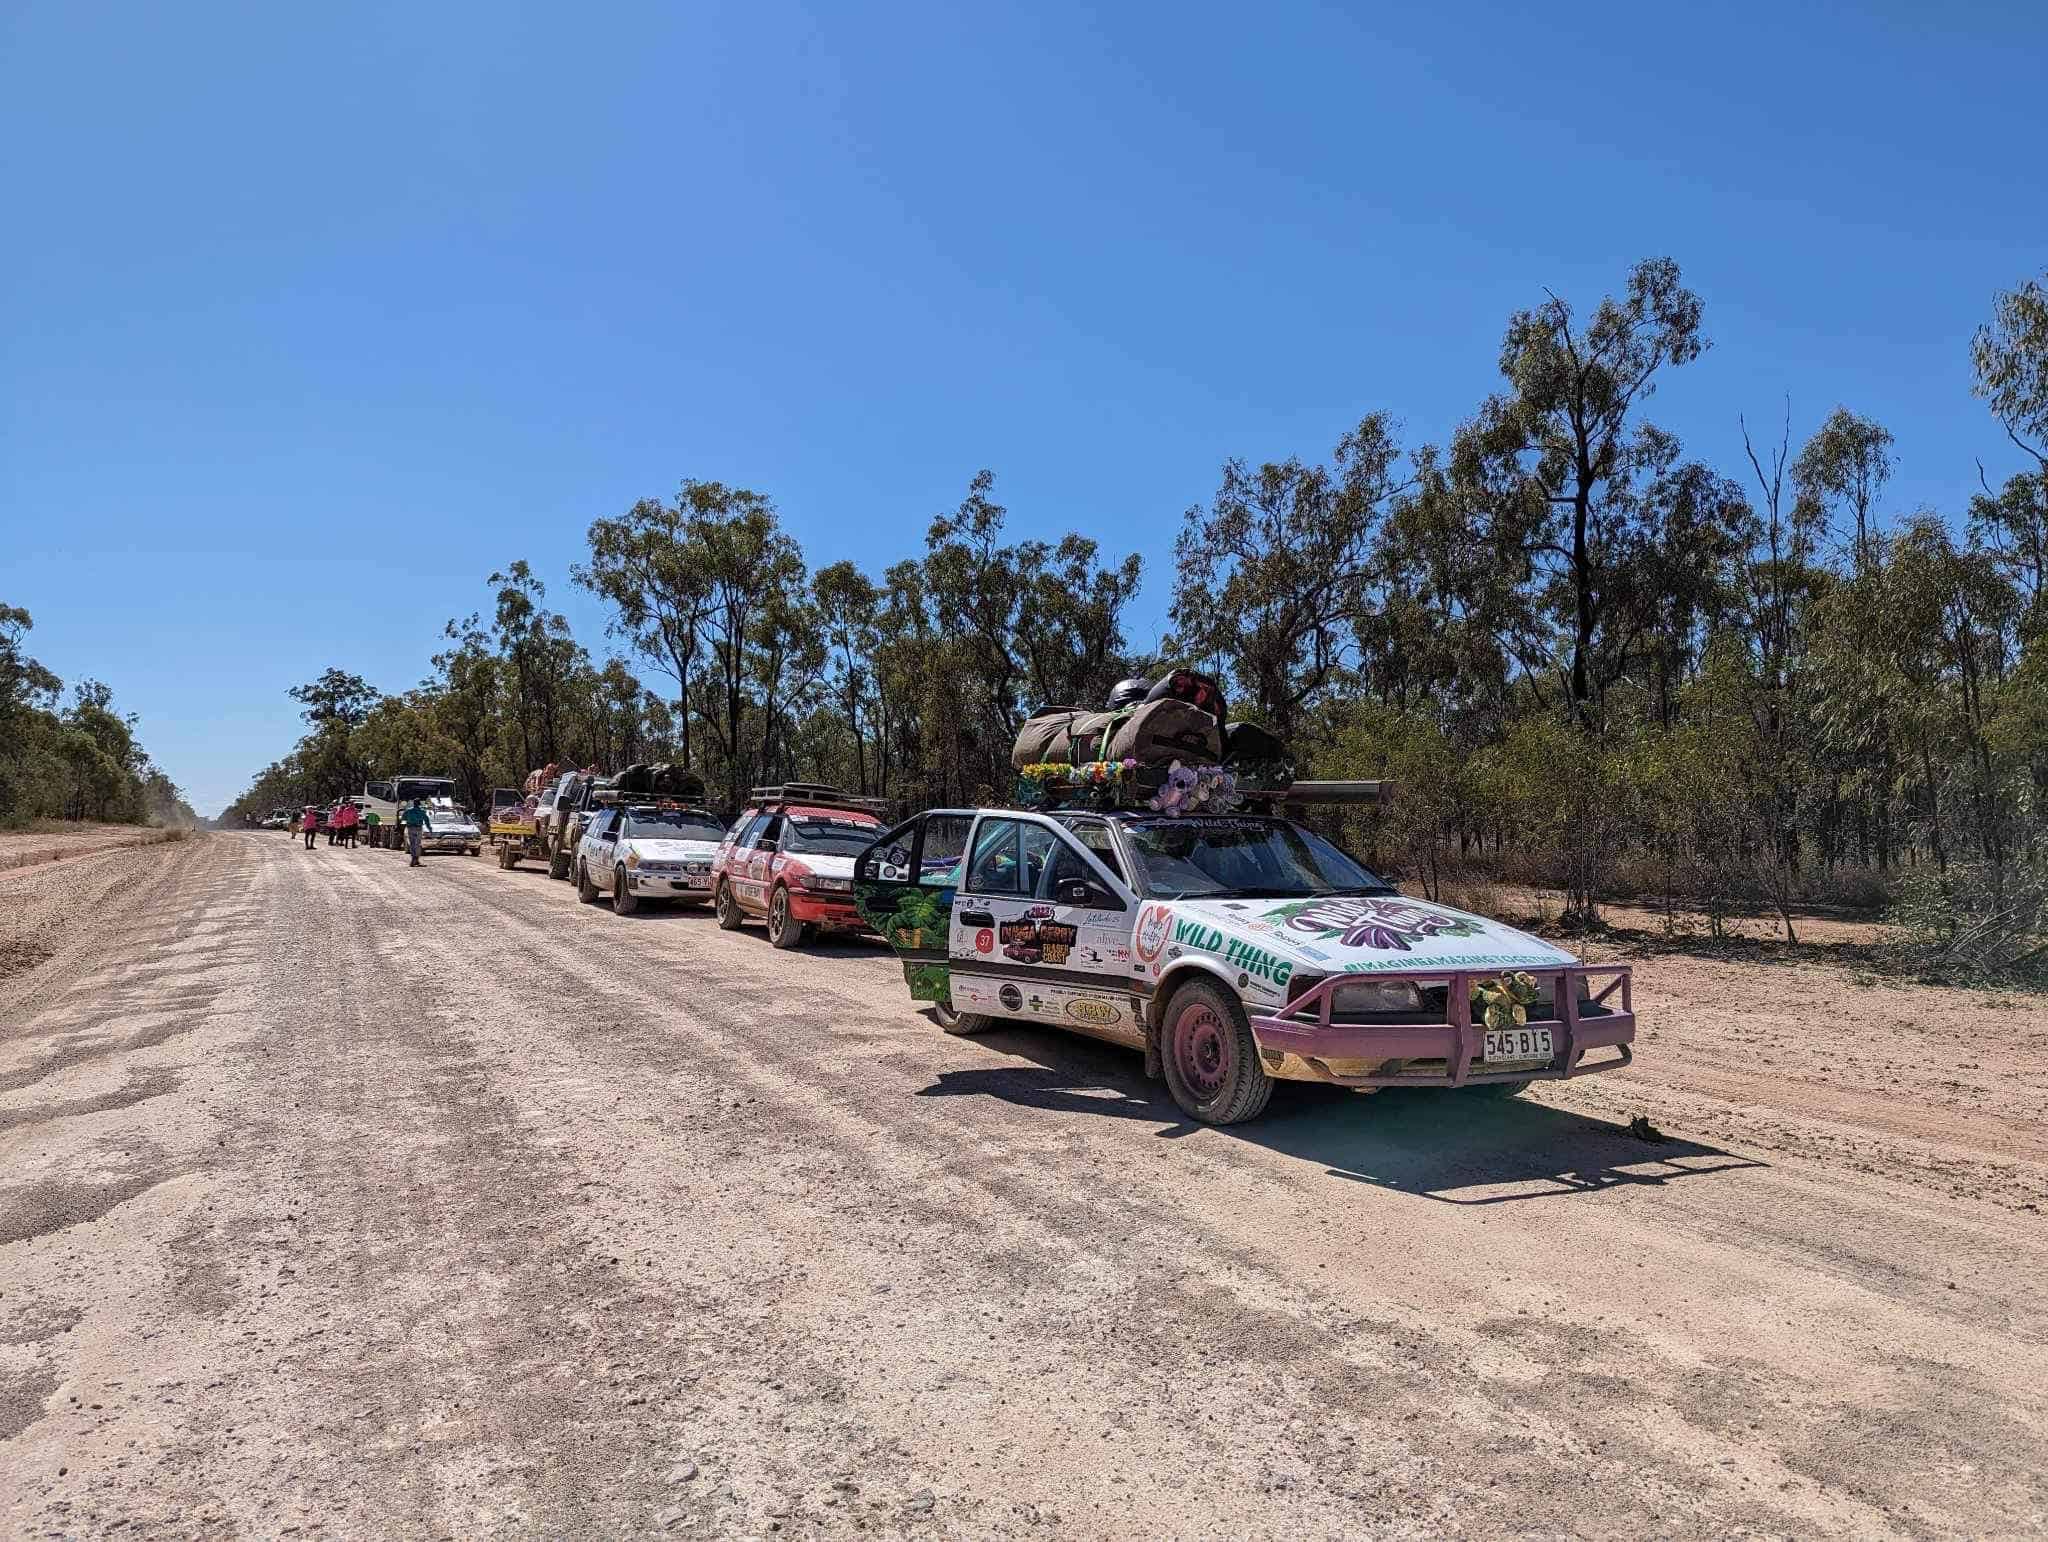 Wild Thing cars lined up for the Dunga Derby Fraser Coast